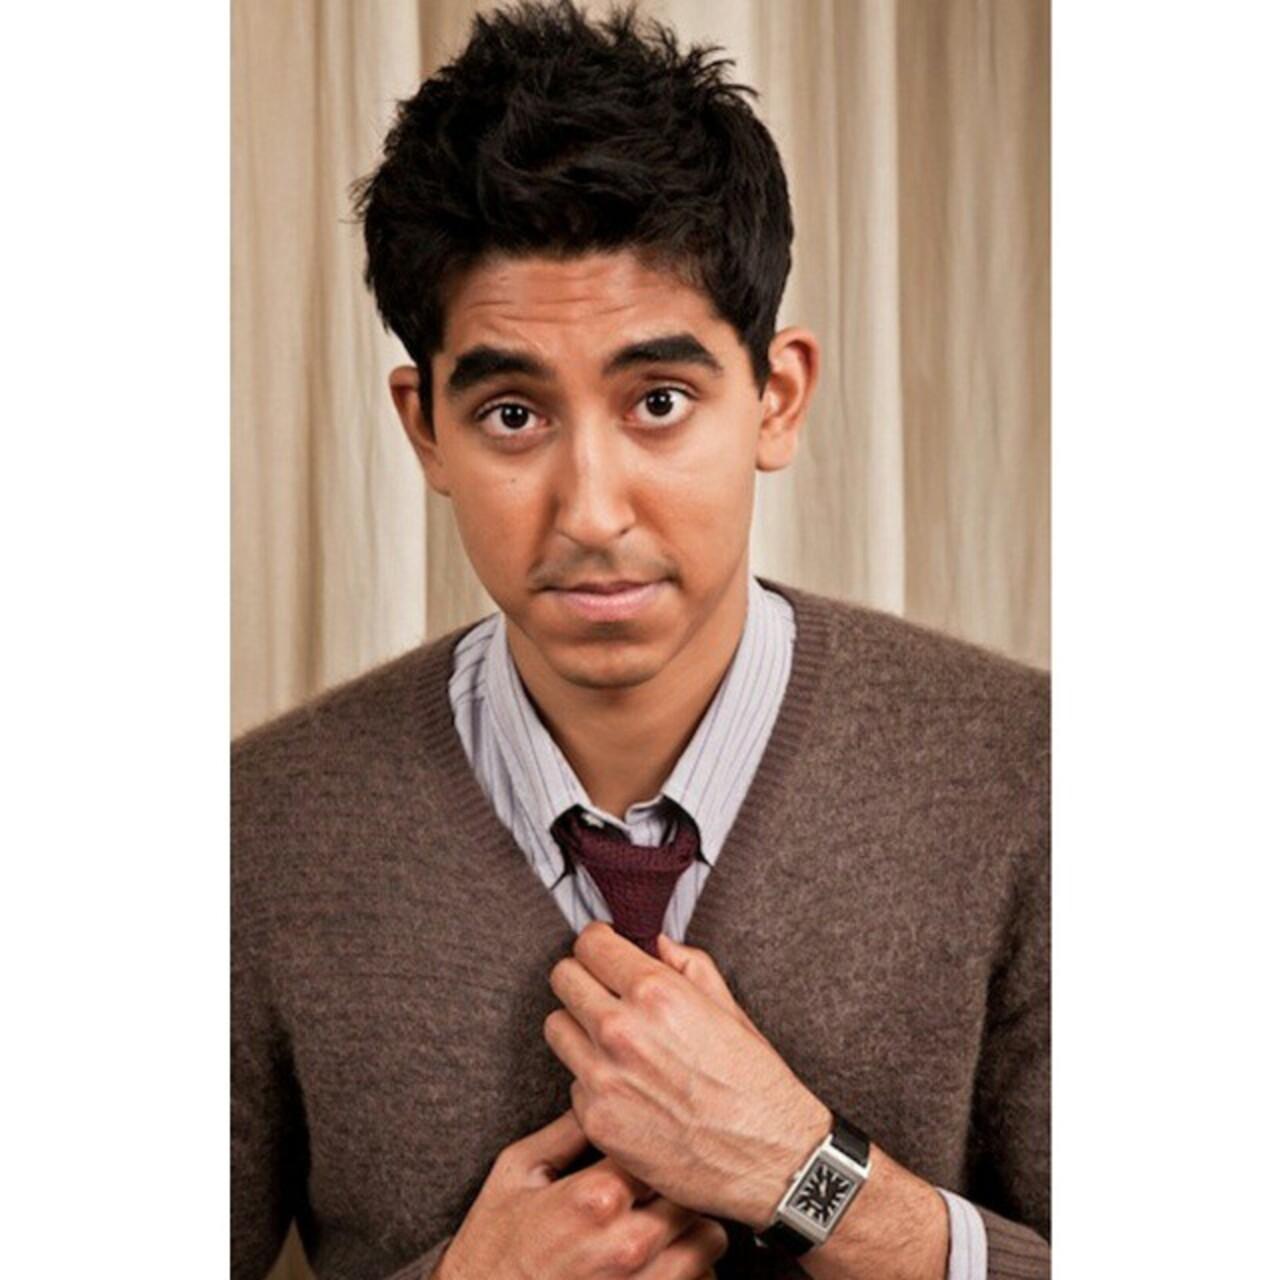 Dev Patel was born on April 23, 1990 in Harrow. He is the son  of Anita, a care worker, and Raju, an IT consultant. His parents are Indian Gujarati Hindus, though they were both born in Nairobi, Kenya. His family roots lie in Gujarat.